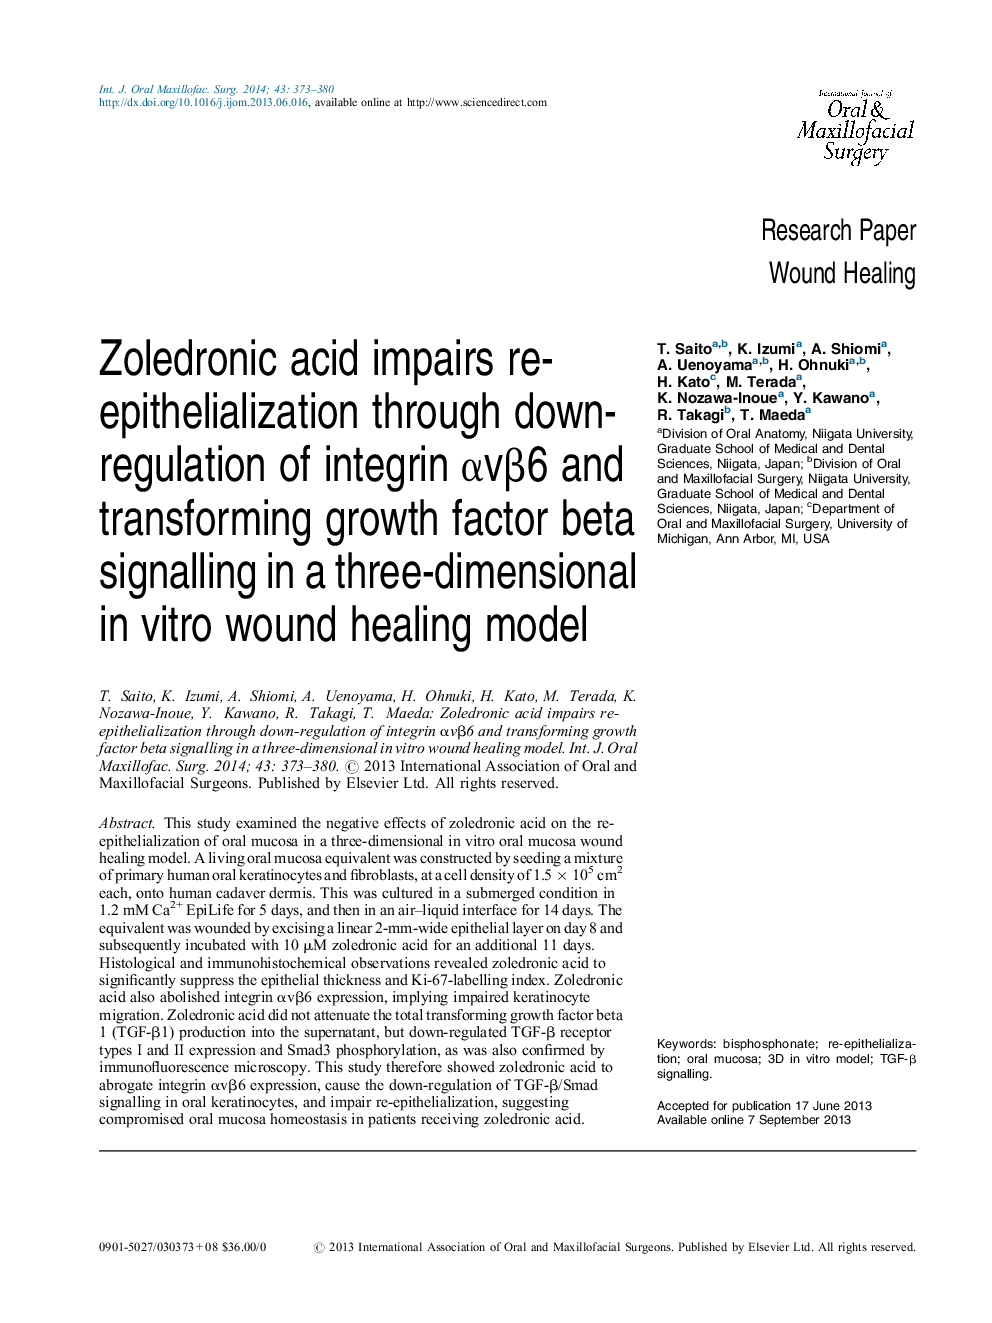 Zoledronic acid impairs re-epithelialization through down-regulation of integrin αvβ6 and transforming growth factor beta signalling in a three-dimensional in vitro wound healing model